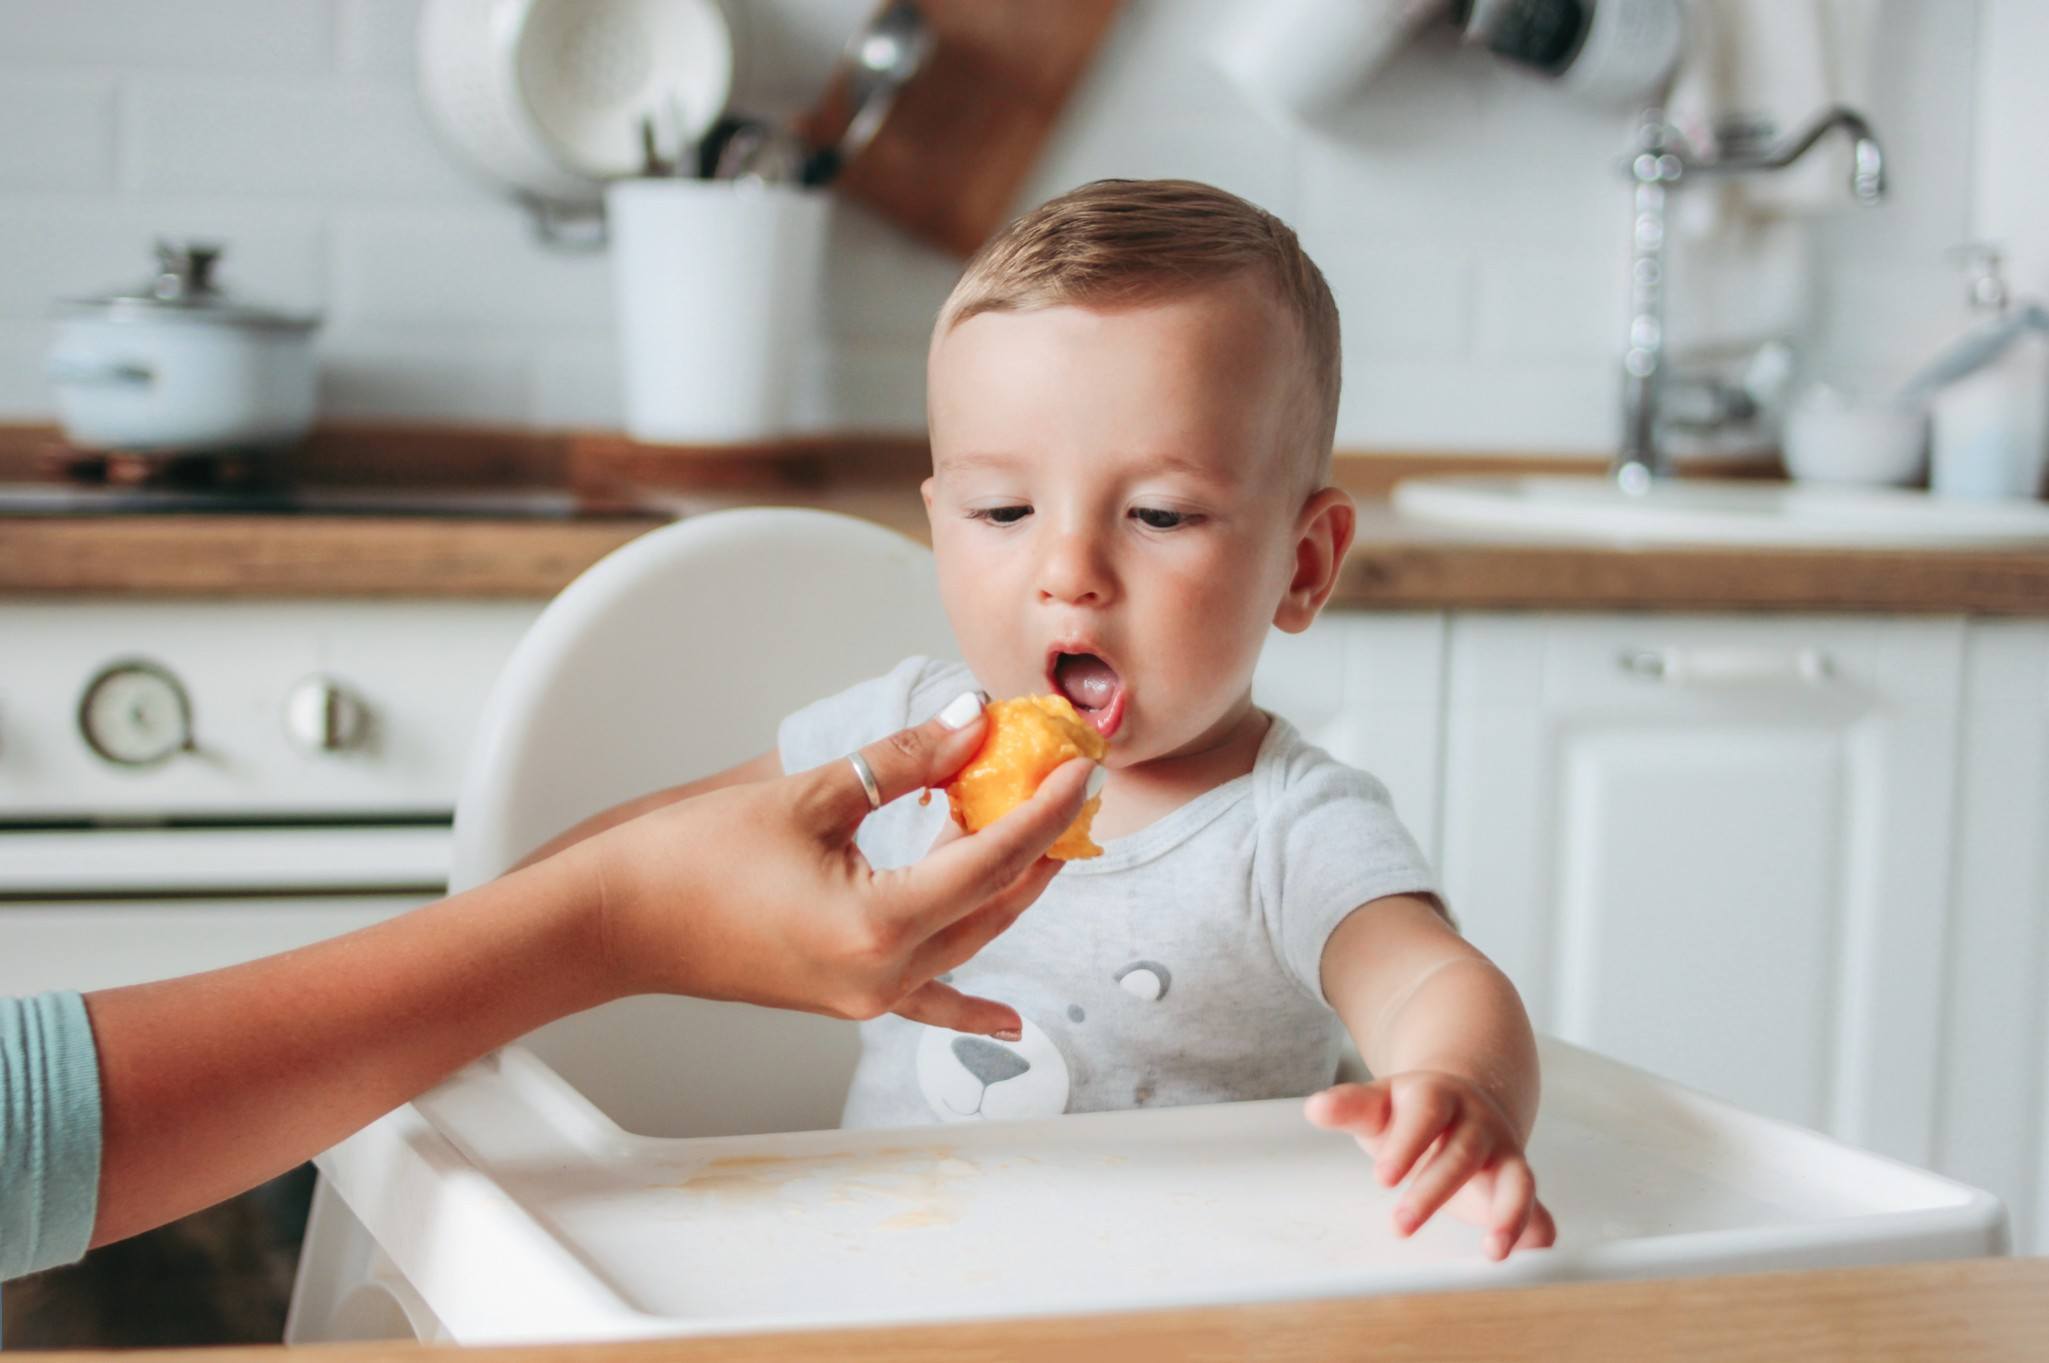 https://www.mother.ly/wp-content/uploads/2022/03/charming-little-baby-boy-eating-first-food-peach-fruit-at-the-kitchen-mom-feeds-child_t20_B8baXY.jpg